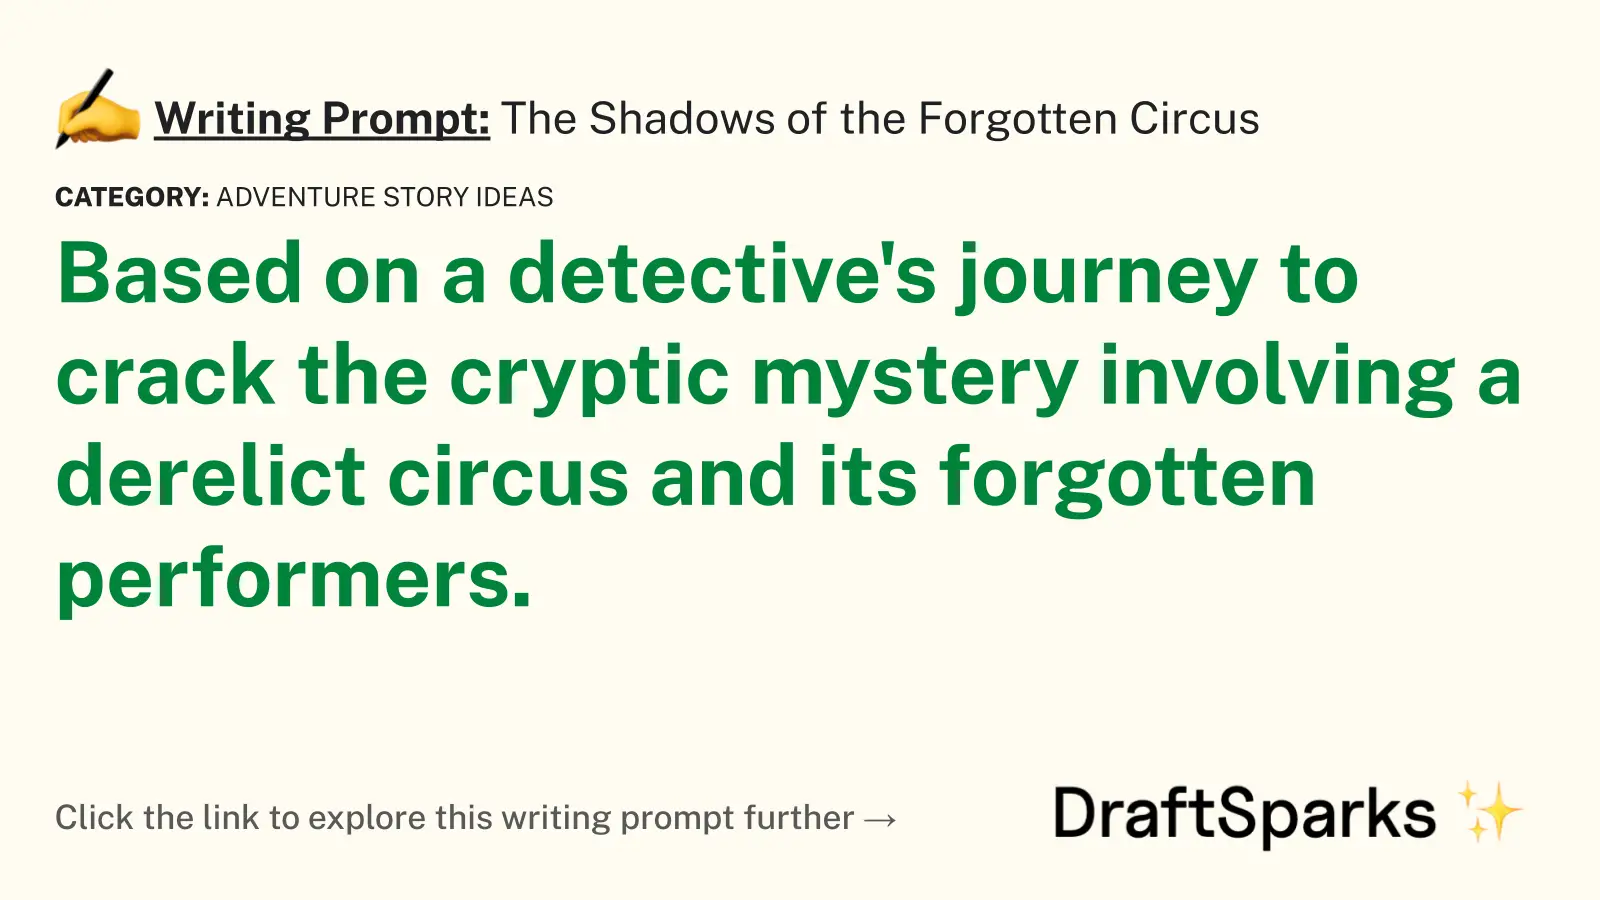 The Shadows of the Forgotten Circus